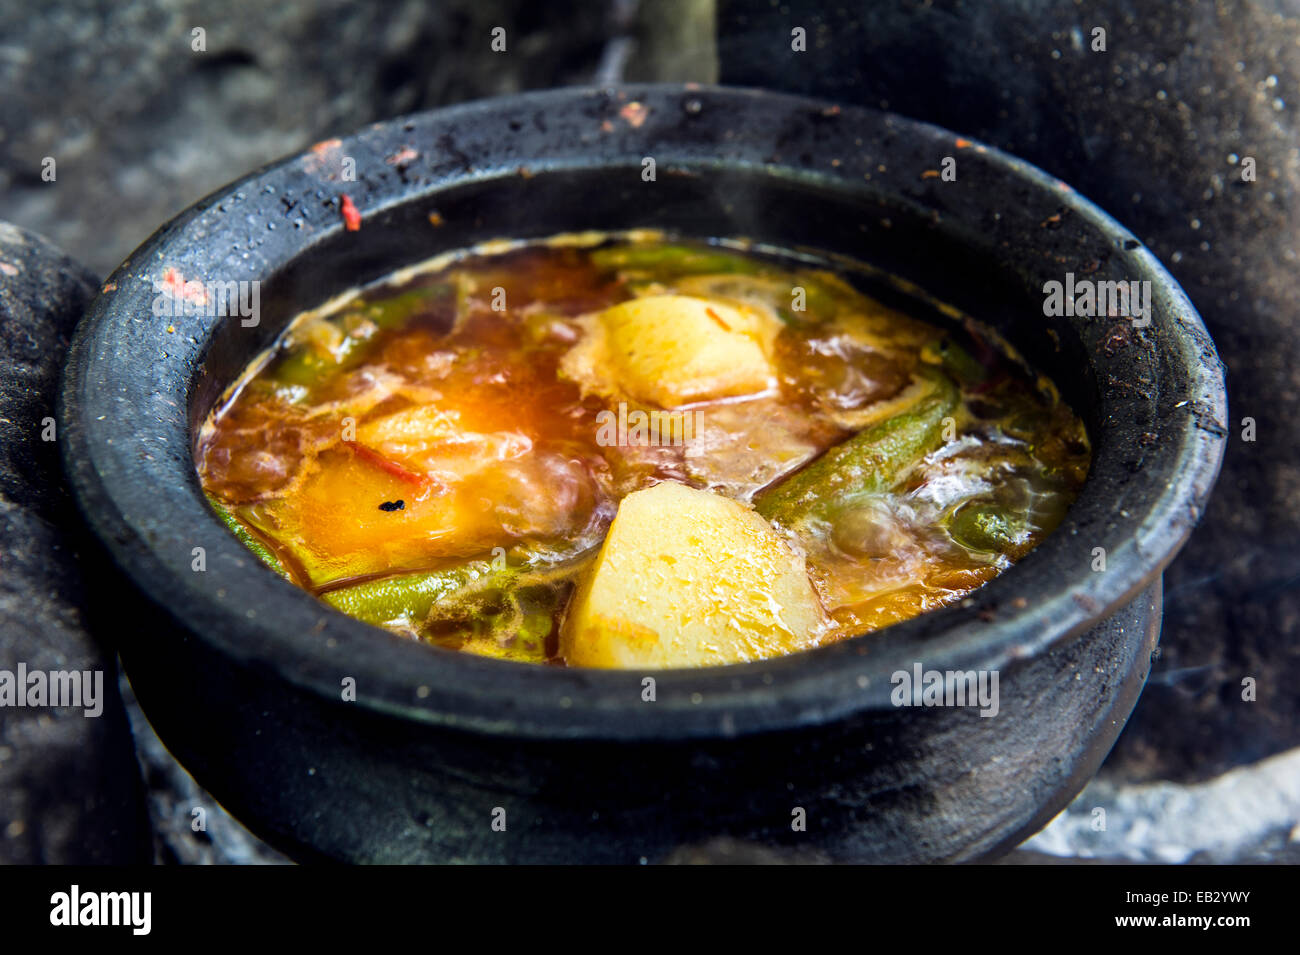 Traditional African food of potatoes, chilli and vegetables cooking in a handmade clay pot on a fire. Stock Photo